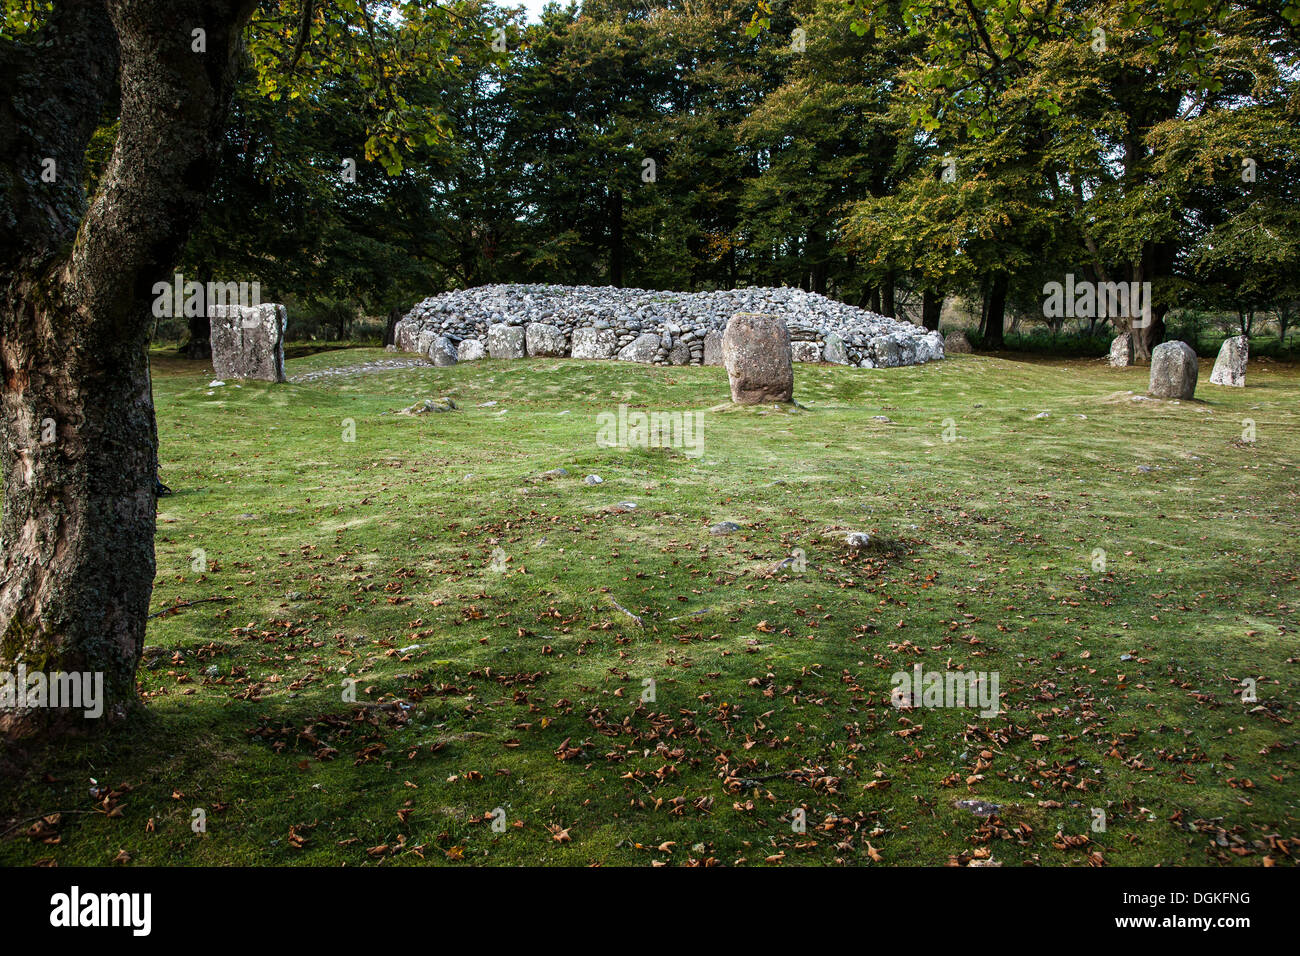 The neolithic burial chambers known as Balnuaran of Clava. Stock Photo